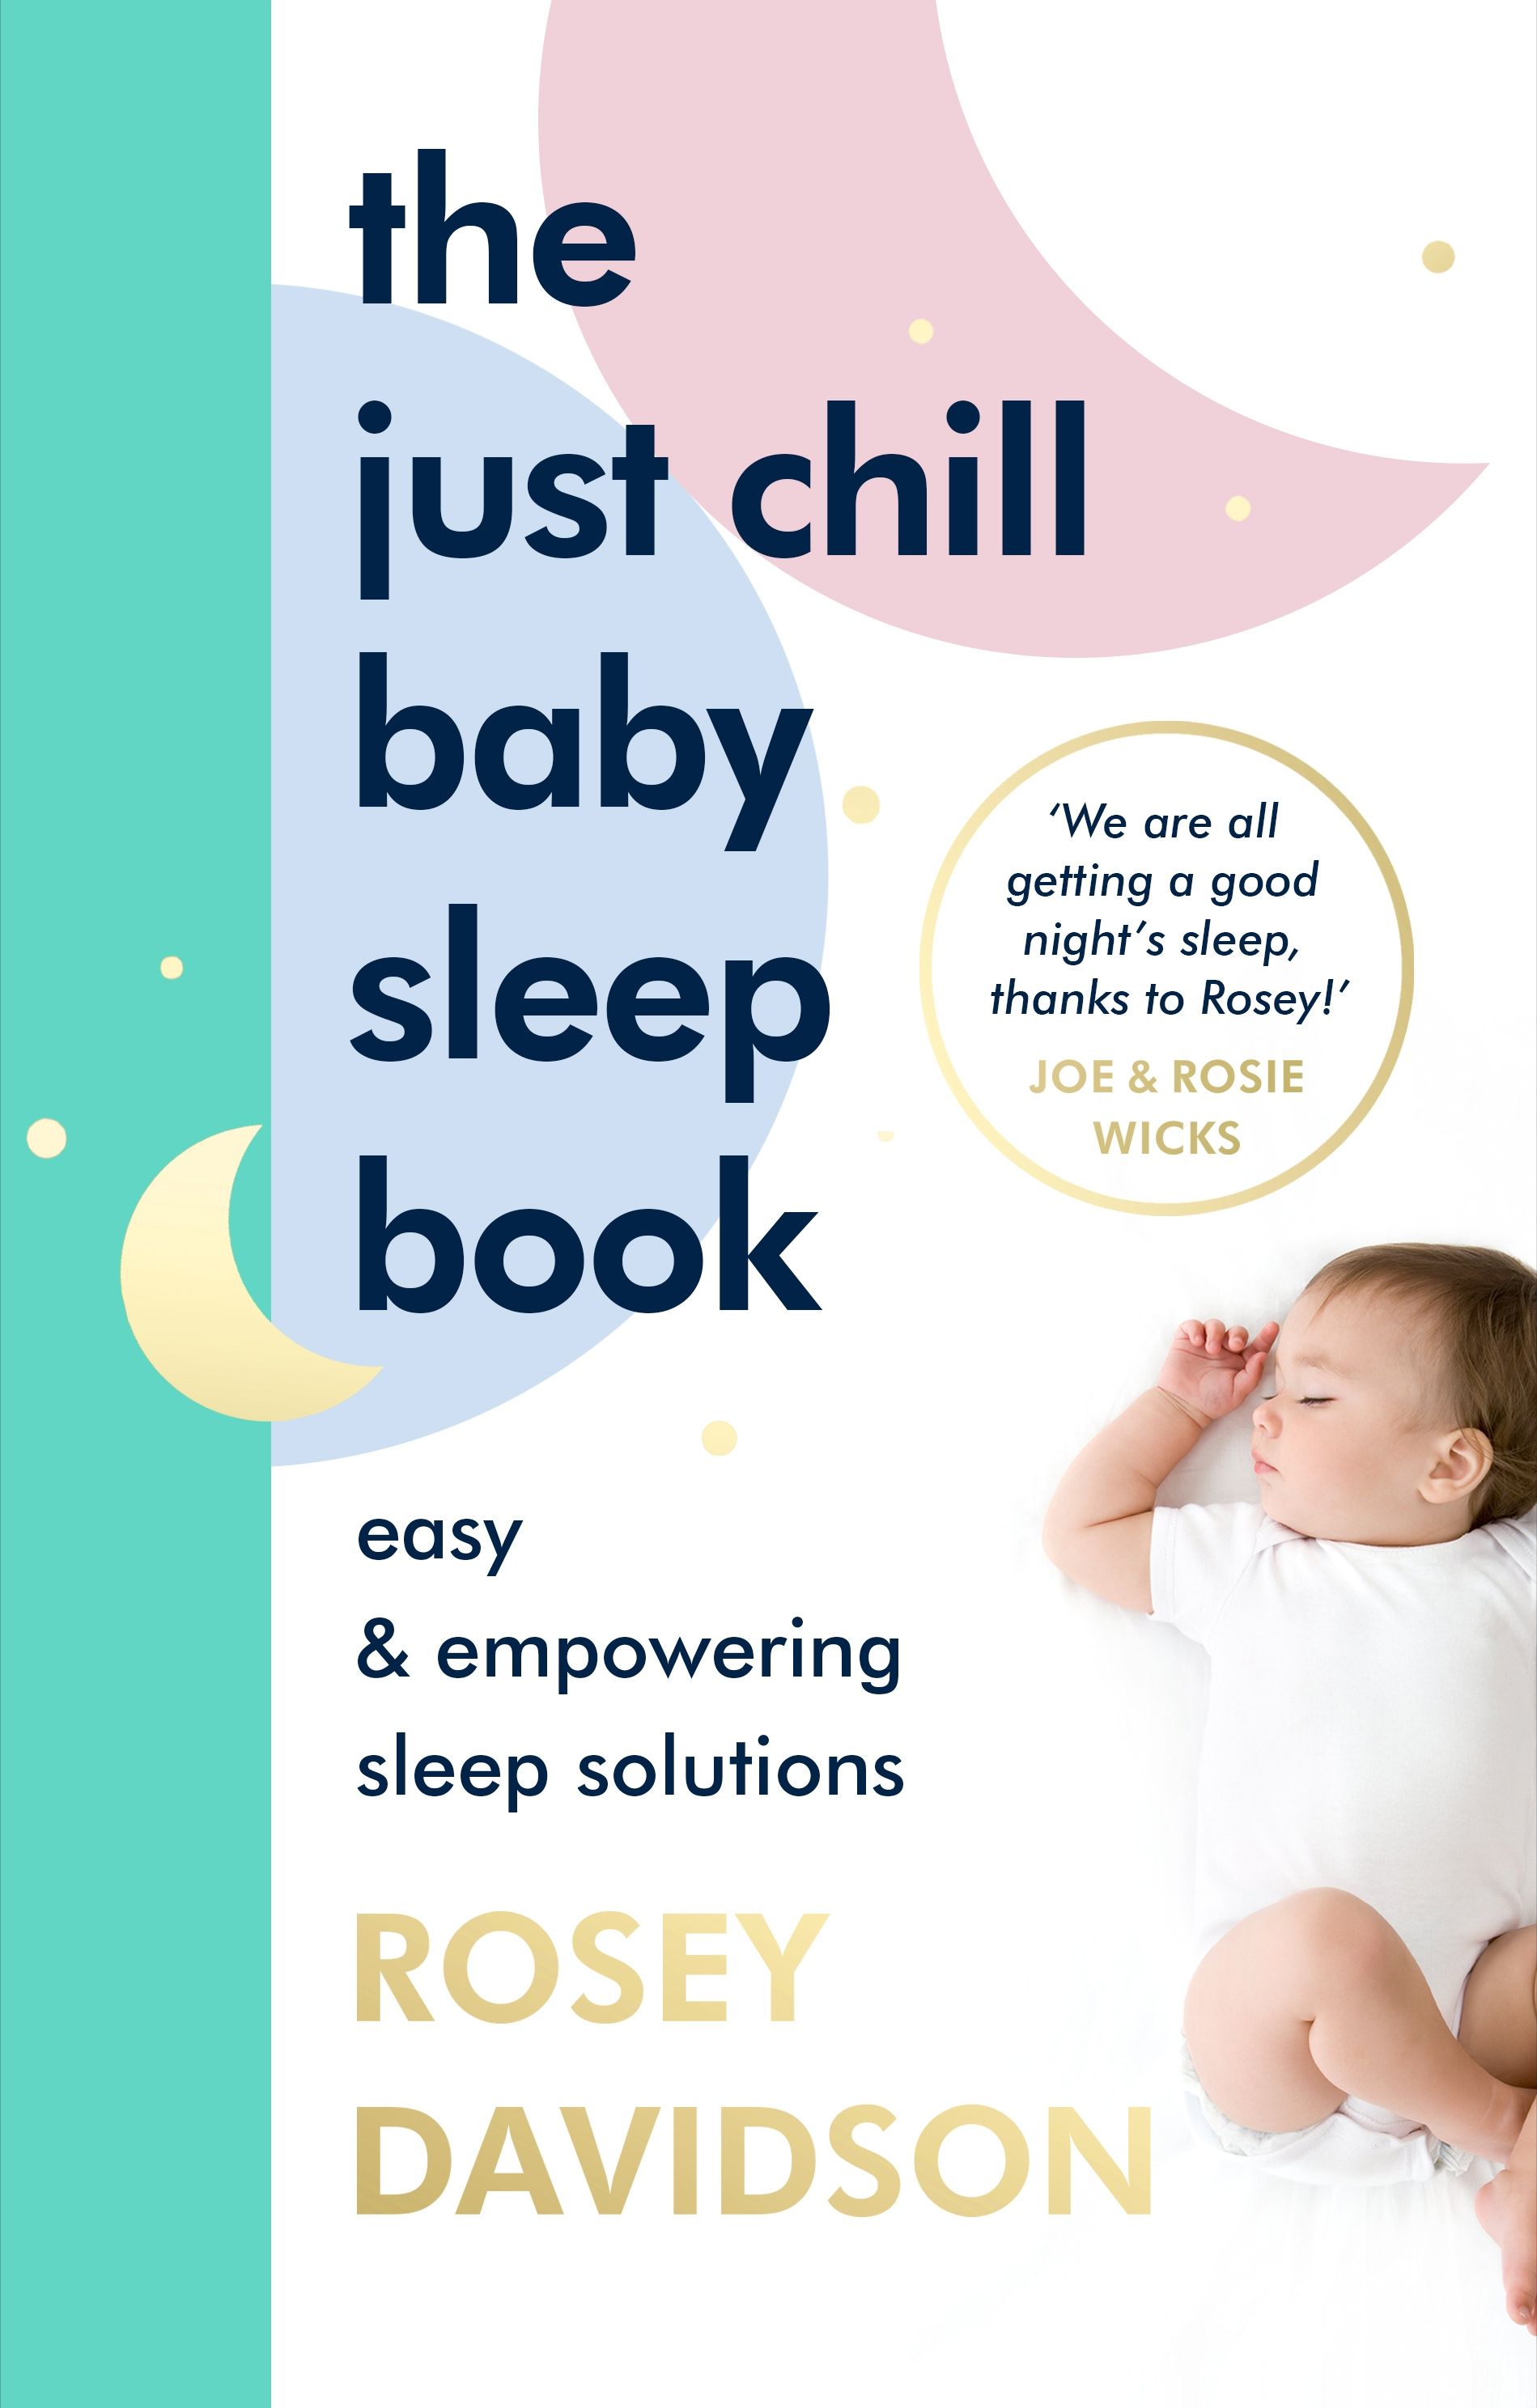 The Just Chill Baby Sleep Book